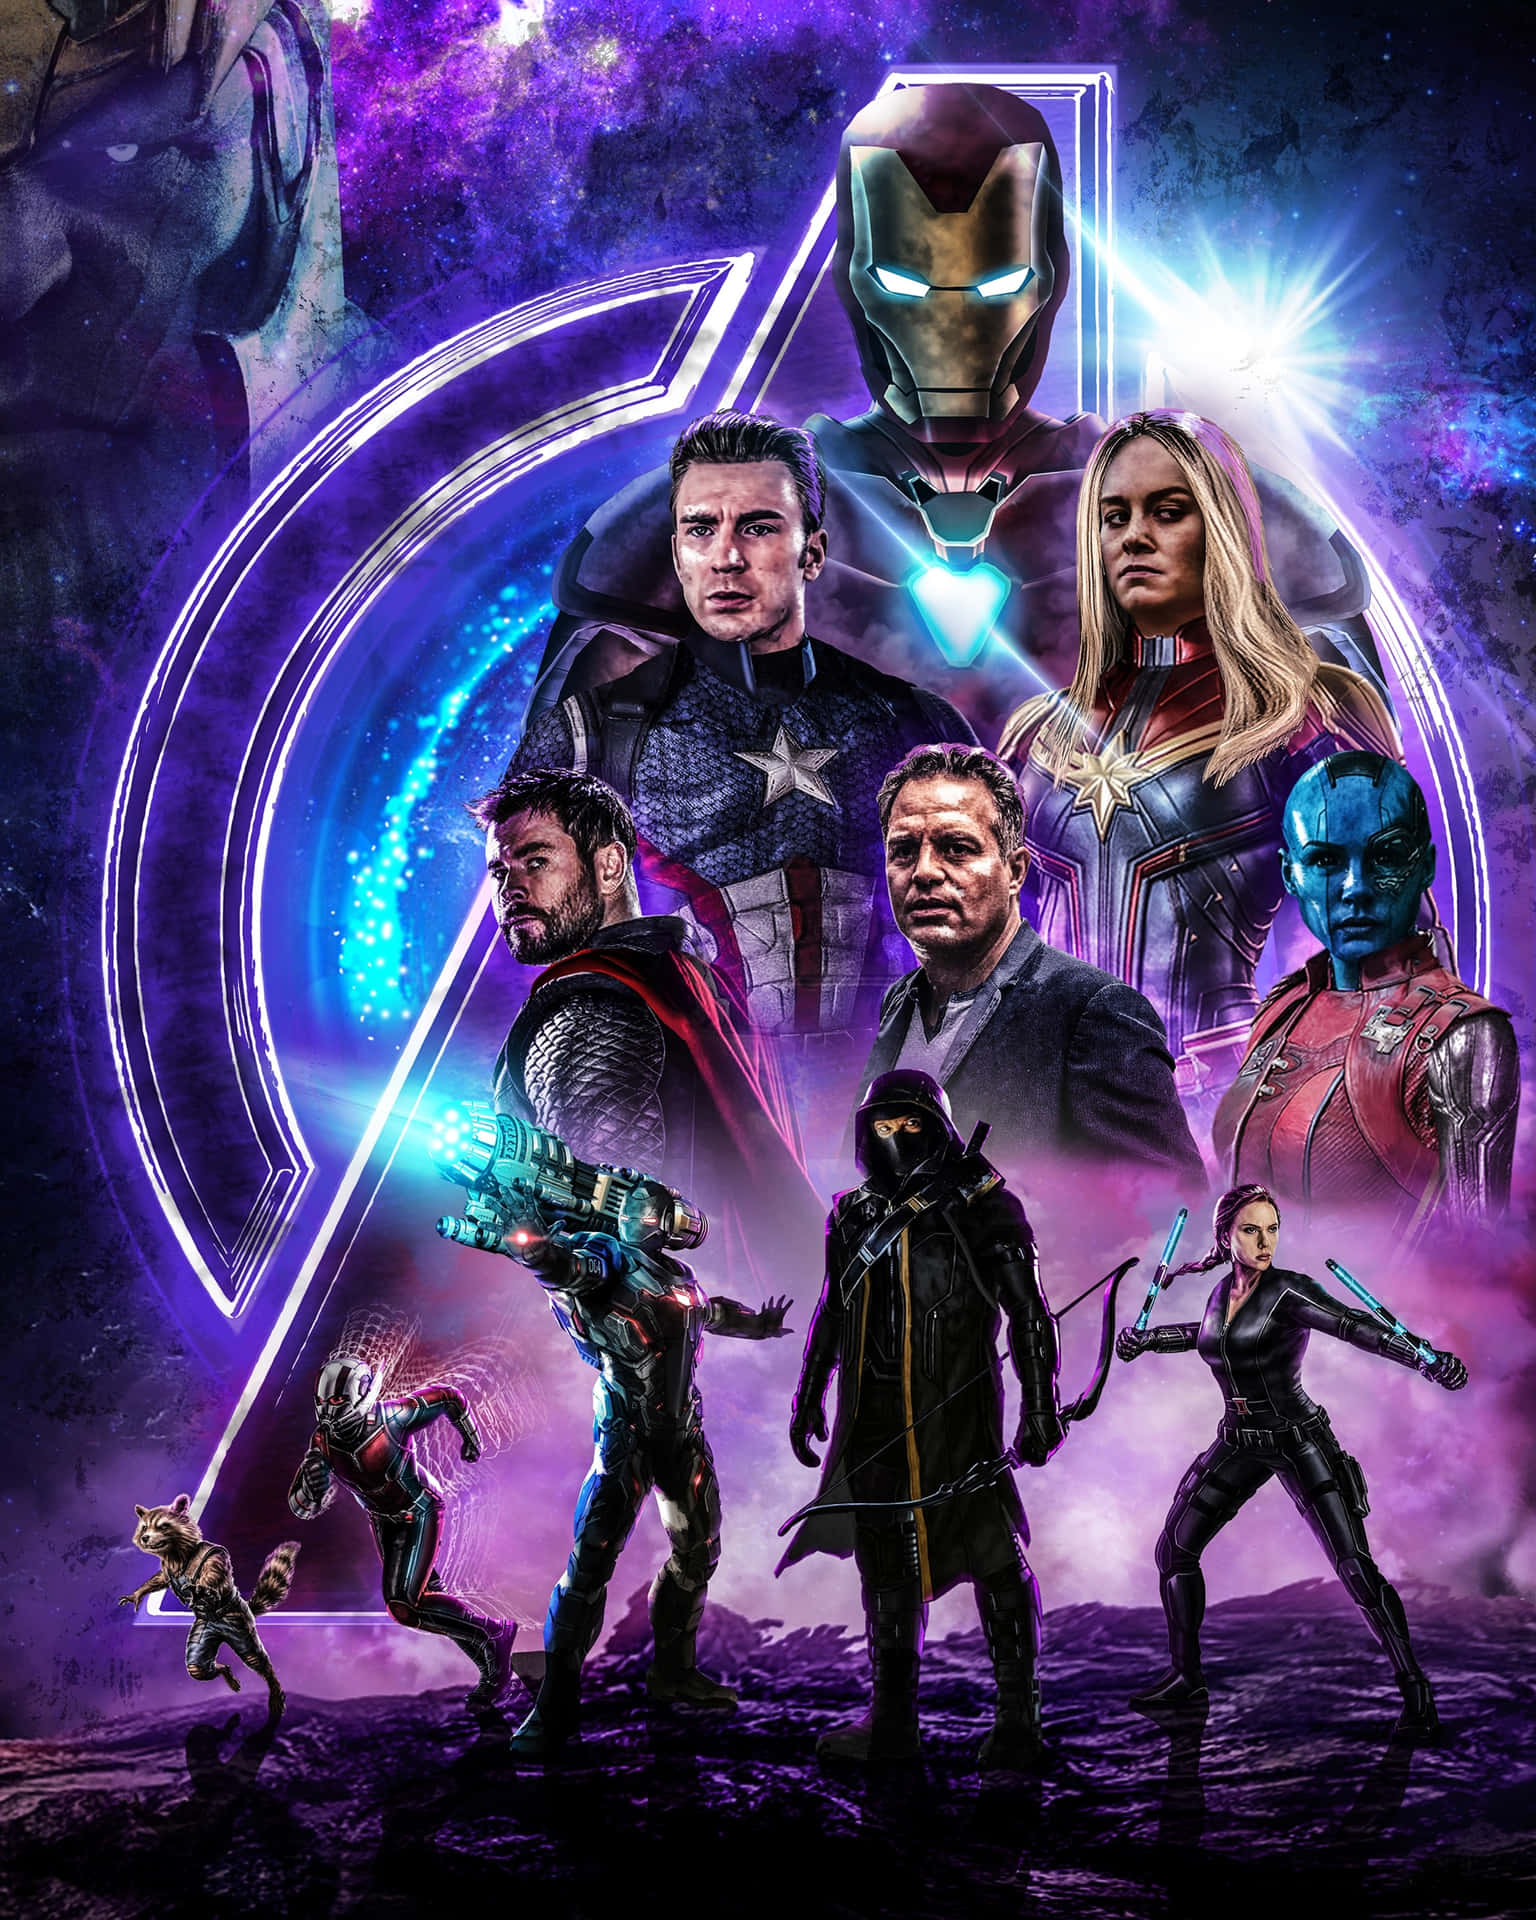 The Avengers assemble to take on Thanos one final time